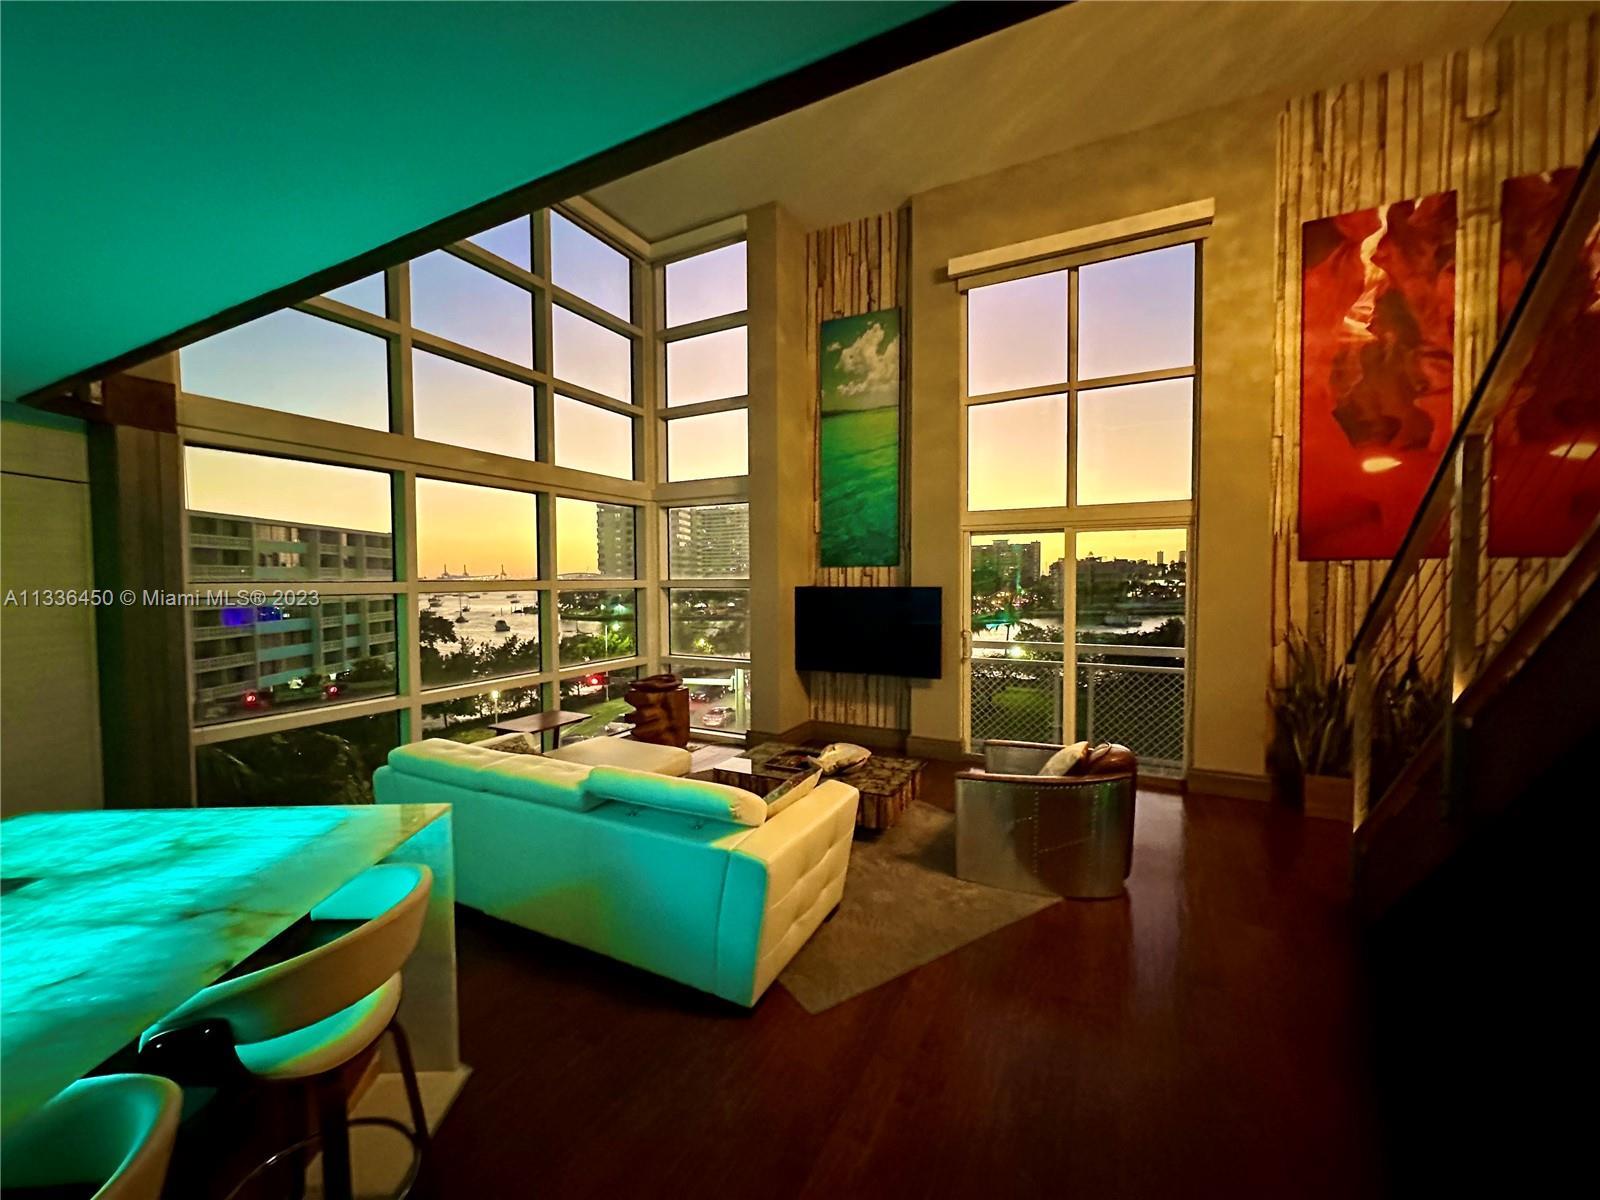 One of a kind designer, high tech LOFT in South Beach. Spectacular Sunset Harbour views and location